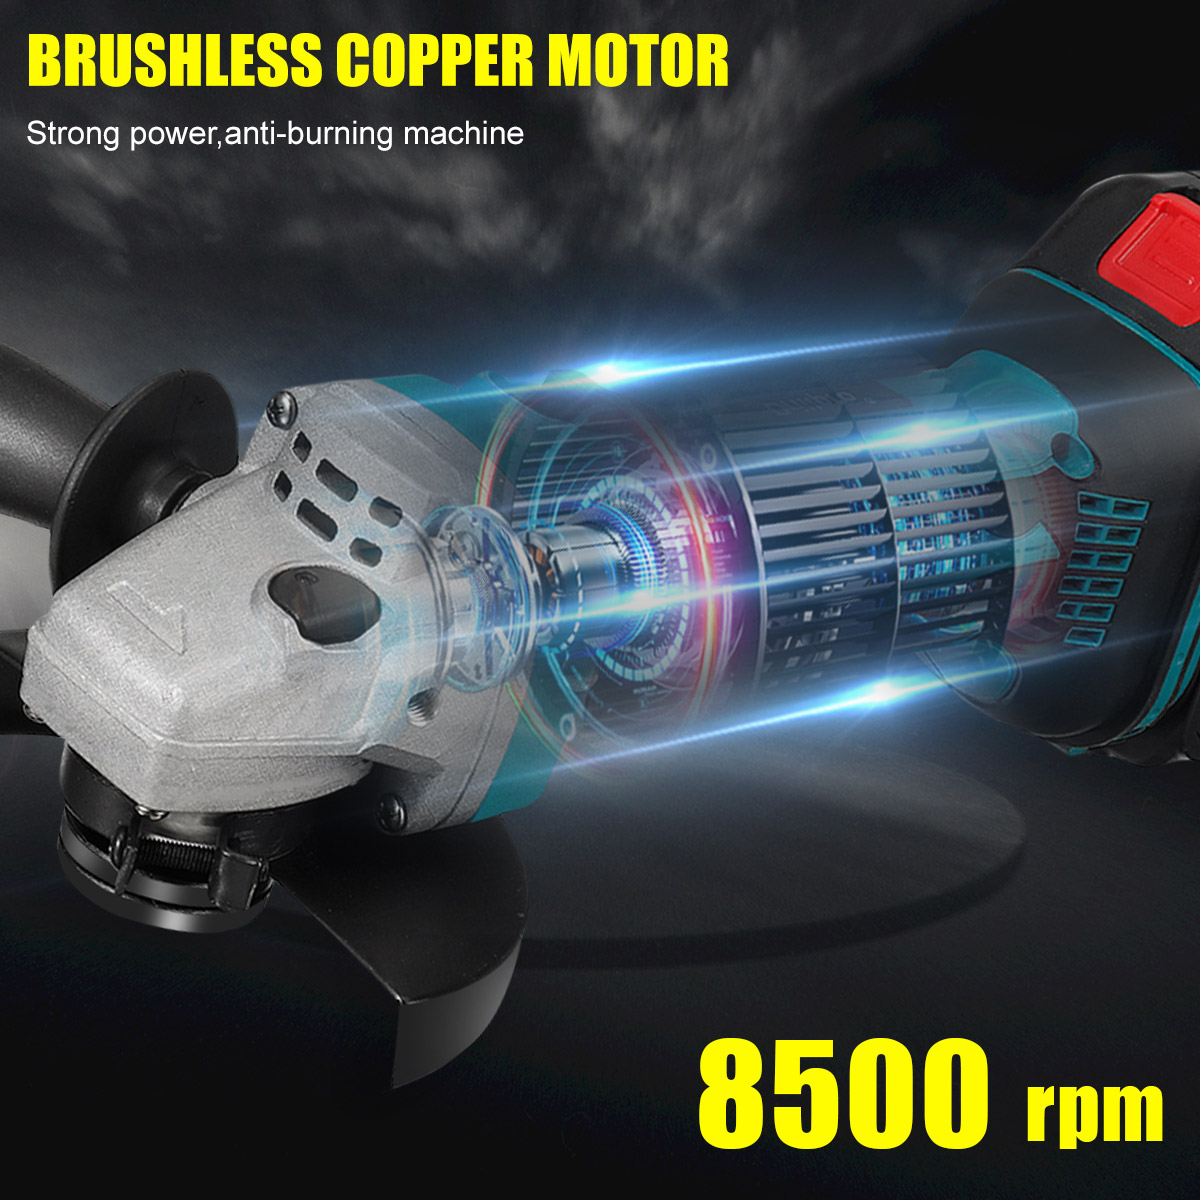 Drillpro-388VF-125mm-BlueBalck-Brushless-Motor-8500rpm-800W-Compact-Lithium-Electric-Polisher-1962696-5